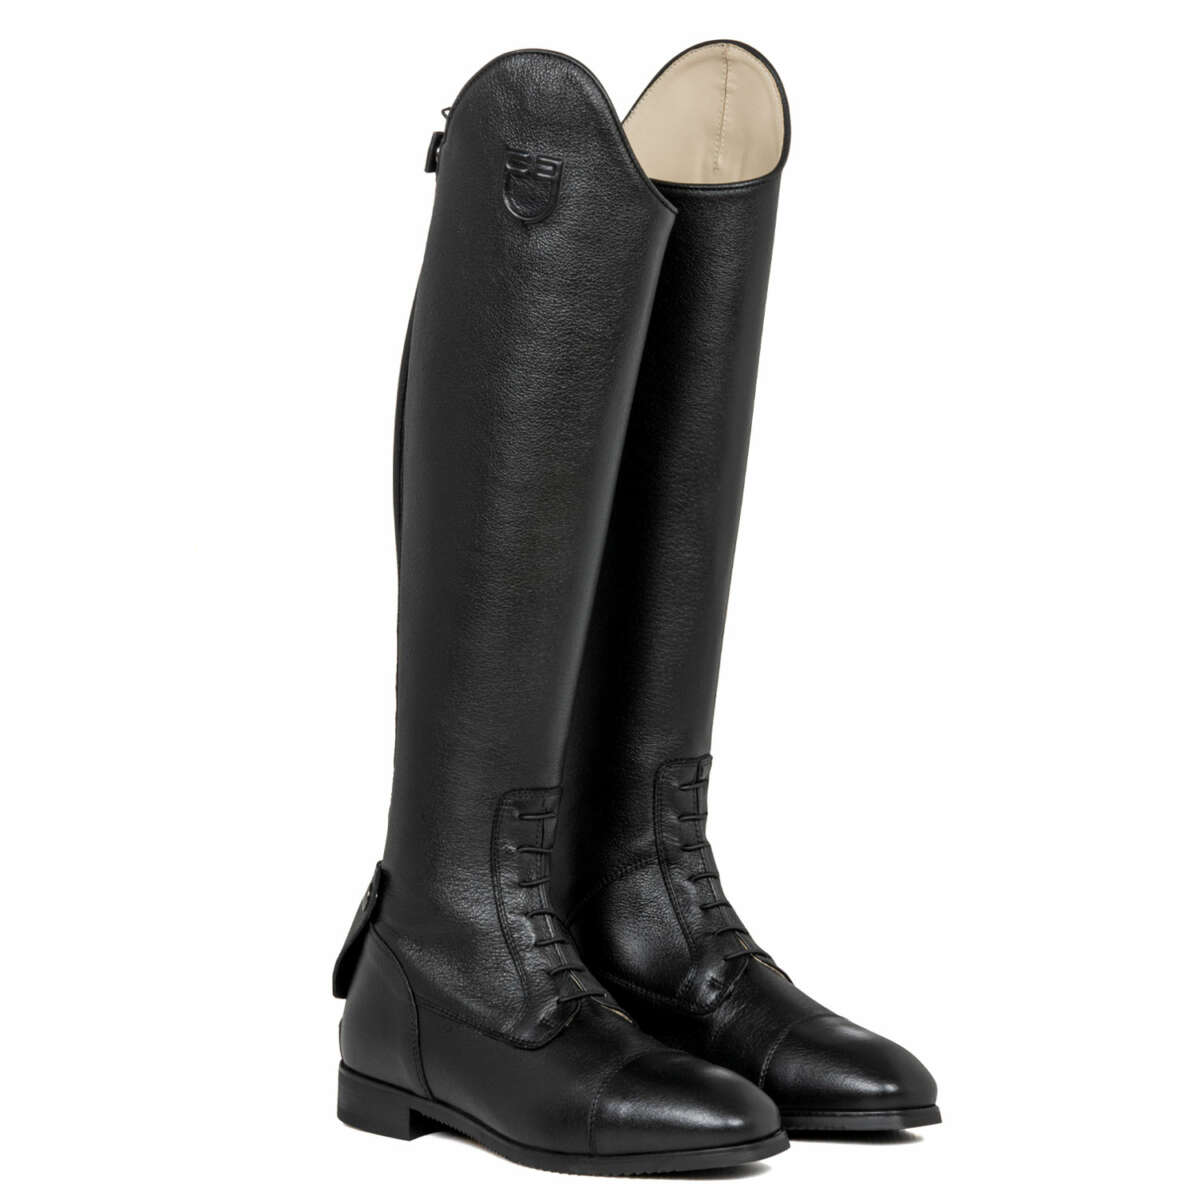 0039563_unisex-calfskin-boots-with-front-laces_etu01007